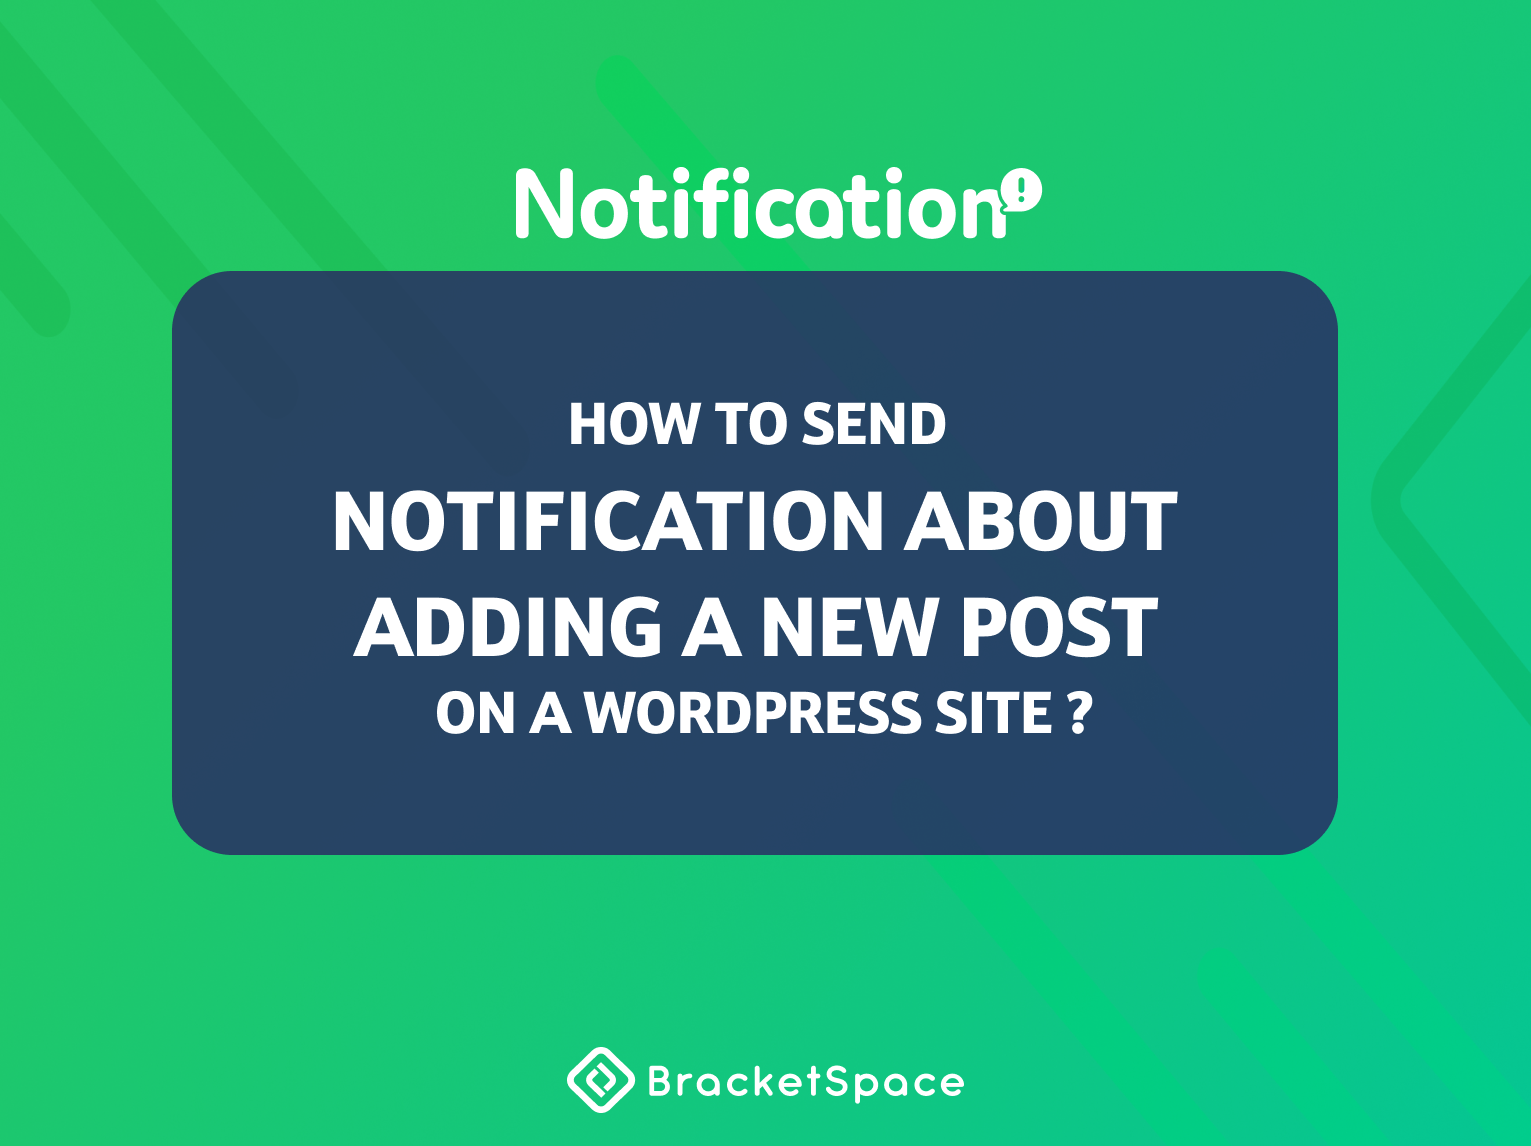 How to Send a Notification about Adding a New Post on a WordPress Site Using Notification?